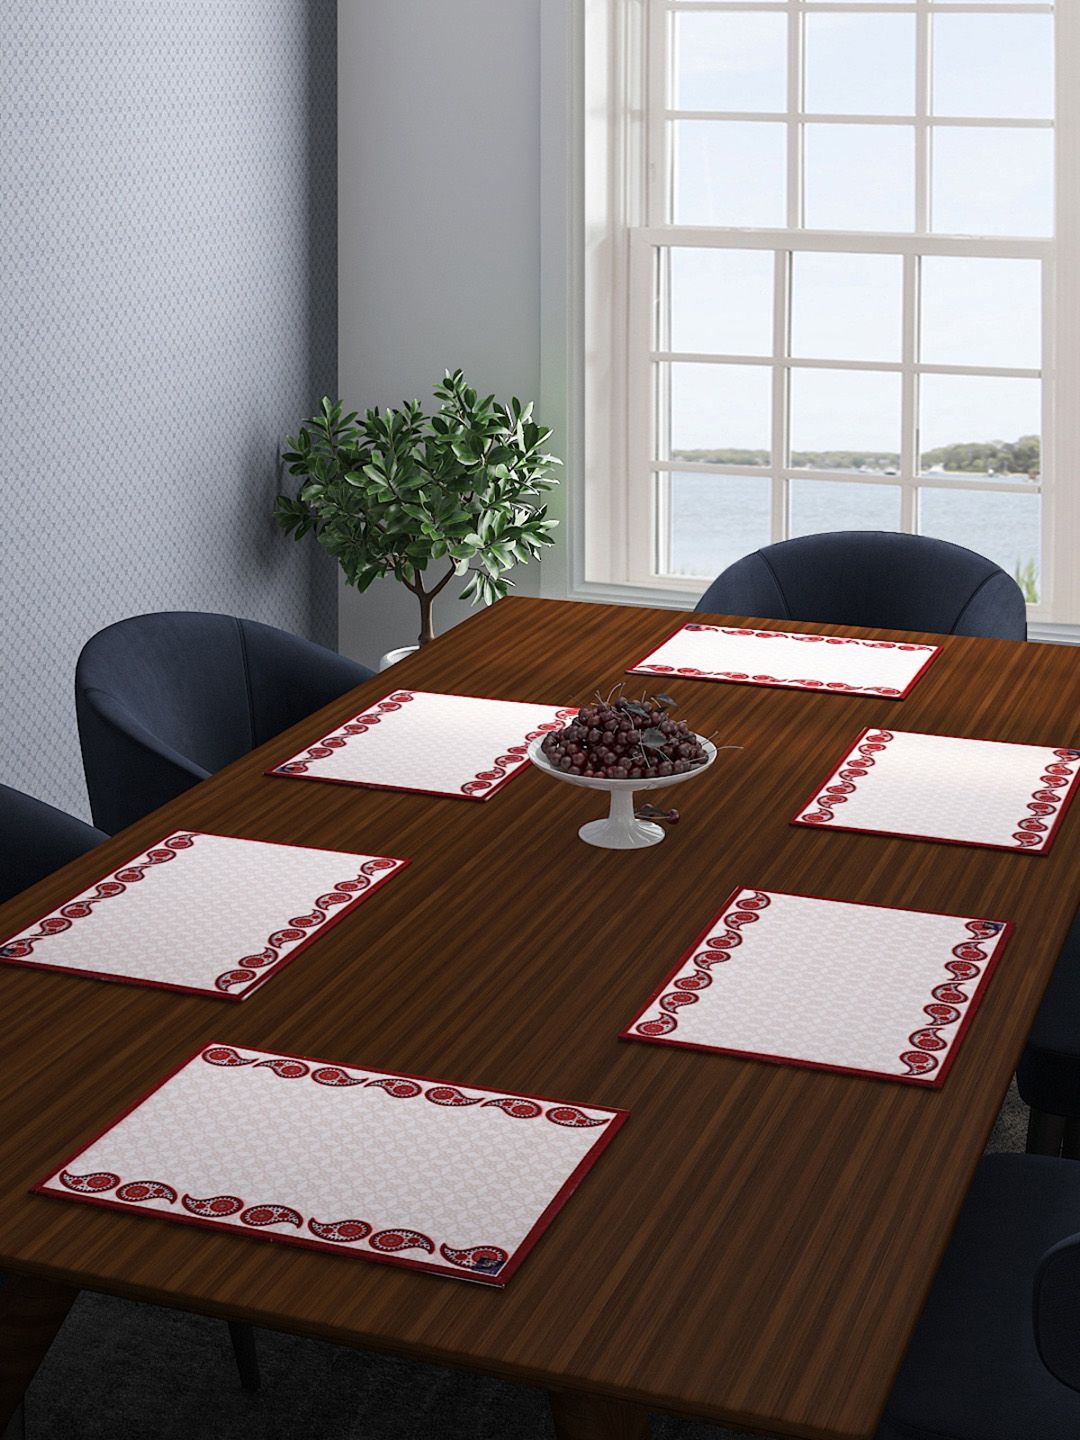 ROMEE Set of 6 Printed Cream and Red Table Mats Price in India